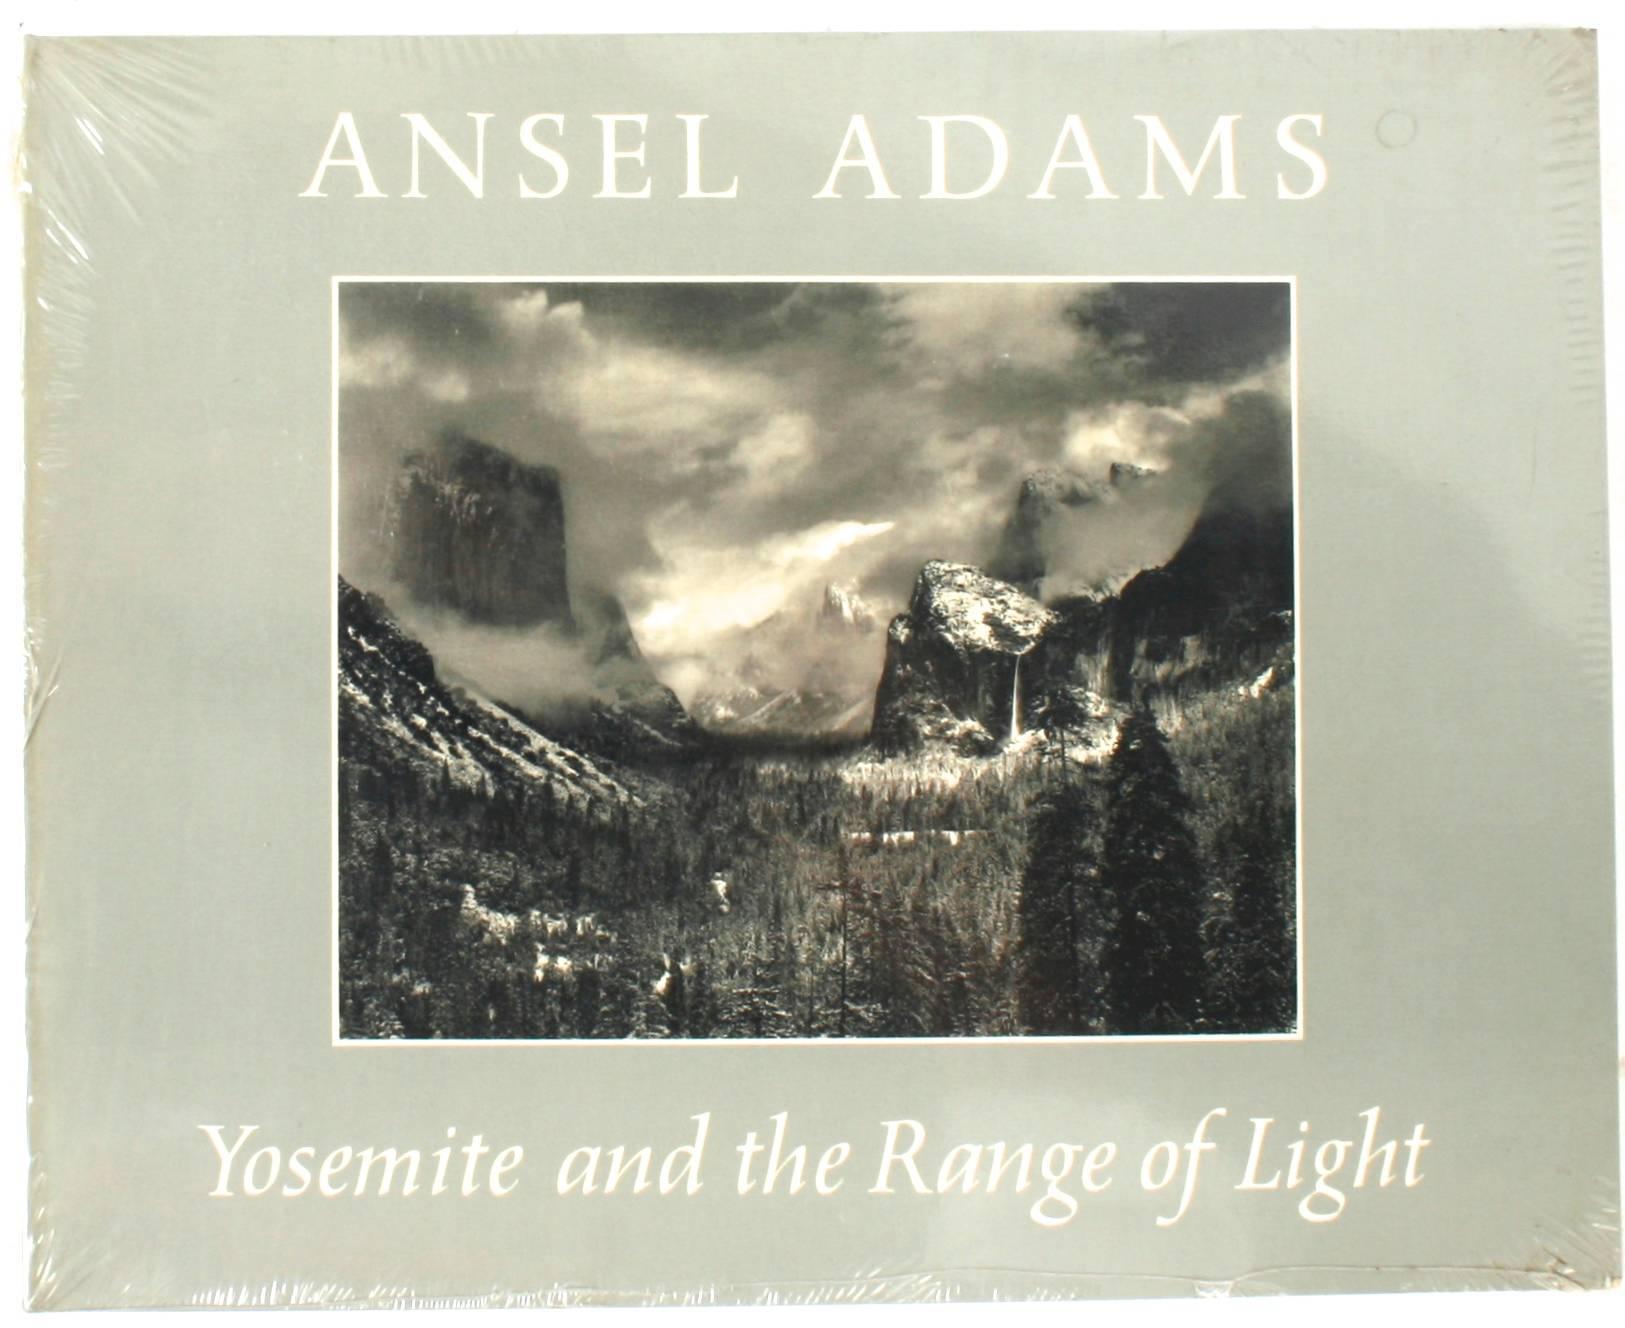 Ansel Adams : An Autobiography by Ansel Adams and Mary Street Alinder. Little, Brown and Co., Boston, MA, 1985. First edition hardback with dust jacket. Light wear on dust jacket otherwise as new. Yosemite and the Range of Light by Ansel Adams. New